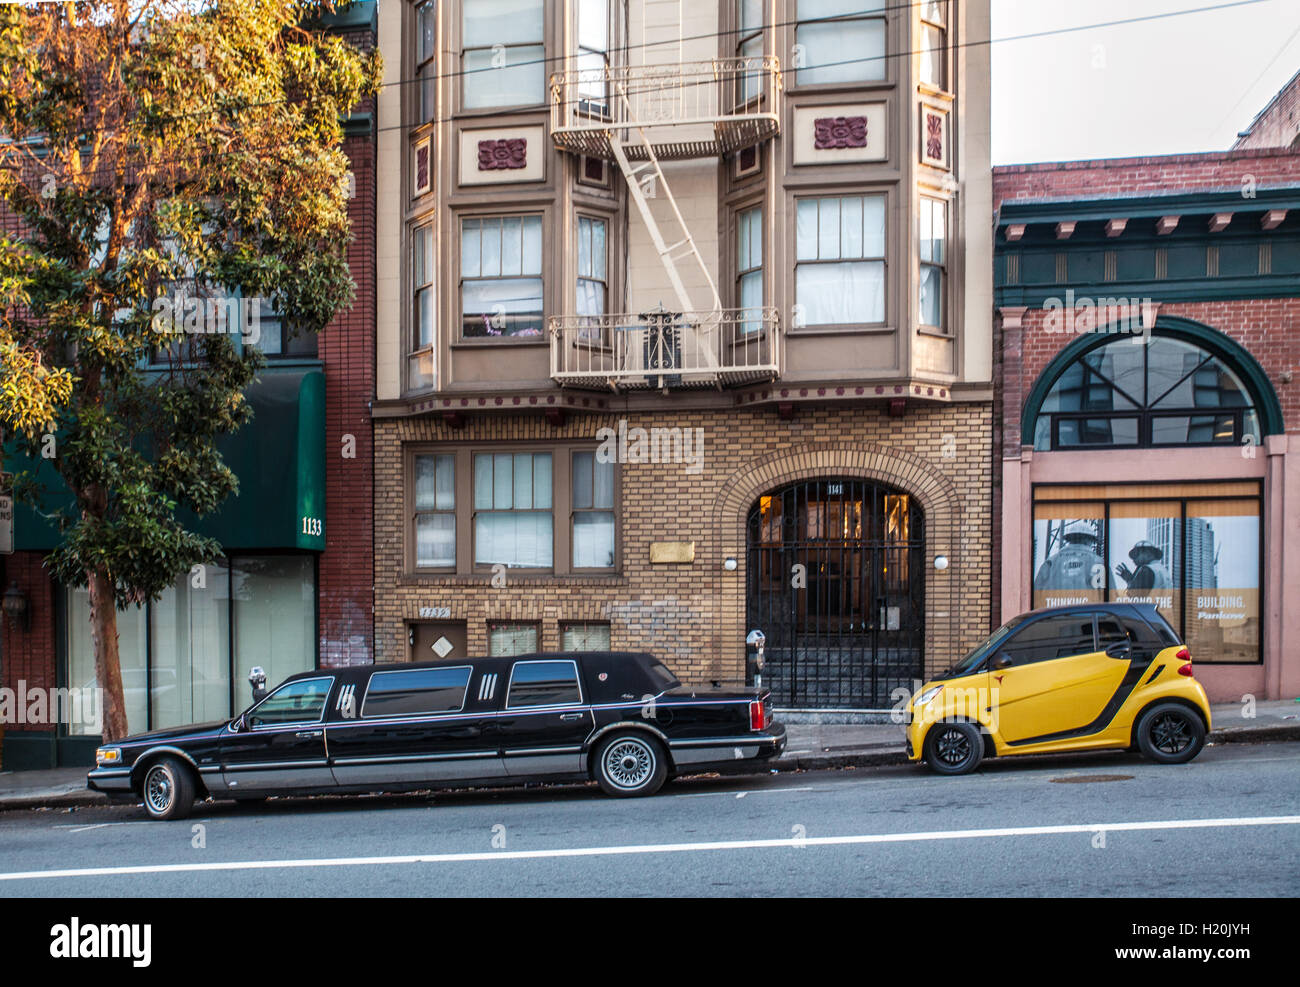 Limousine and mini in the street of San Francisco: symbol of inequality and gentrification in the city Stock Photo